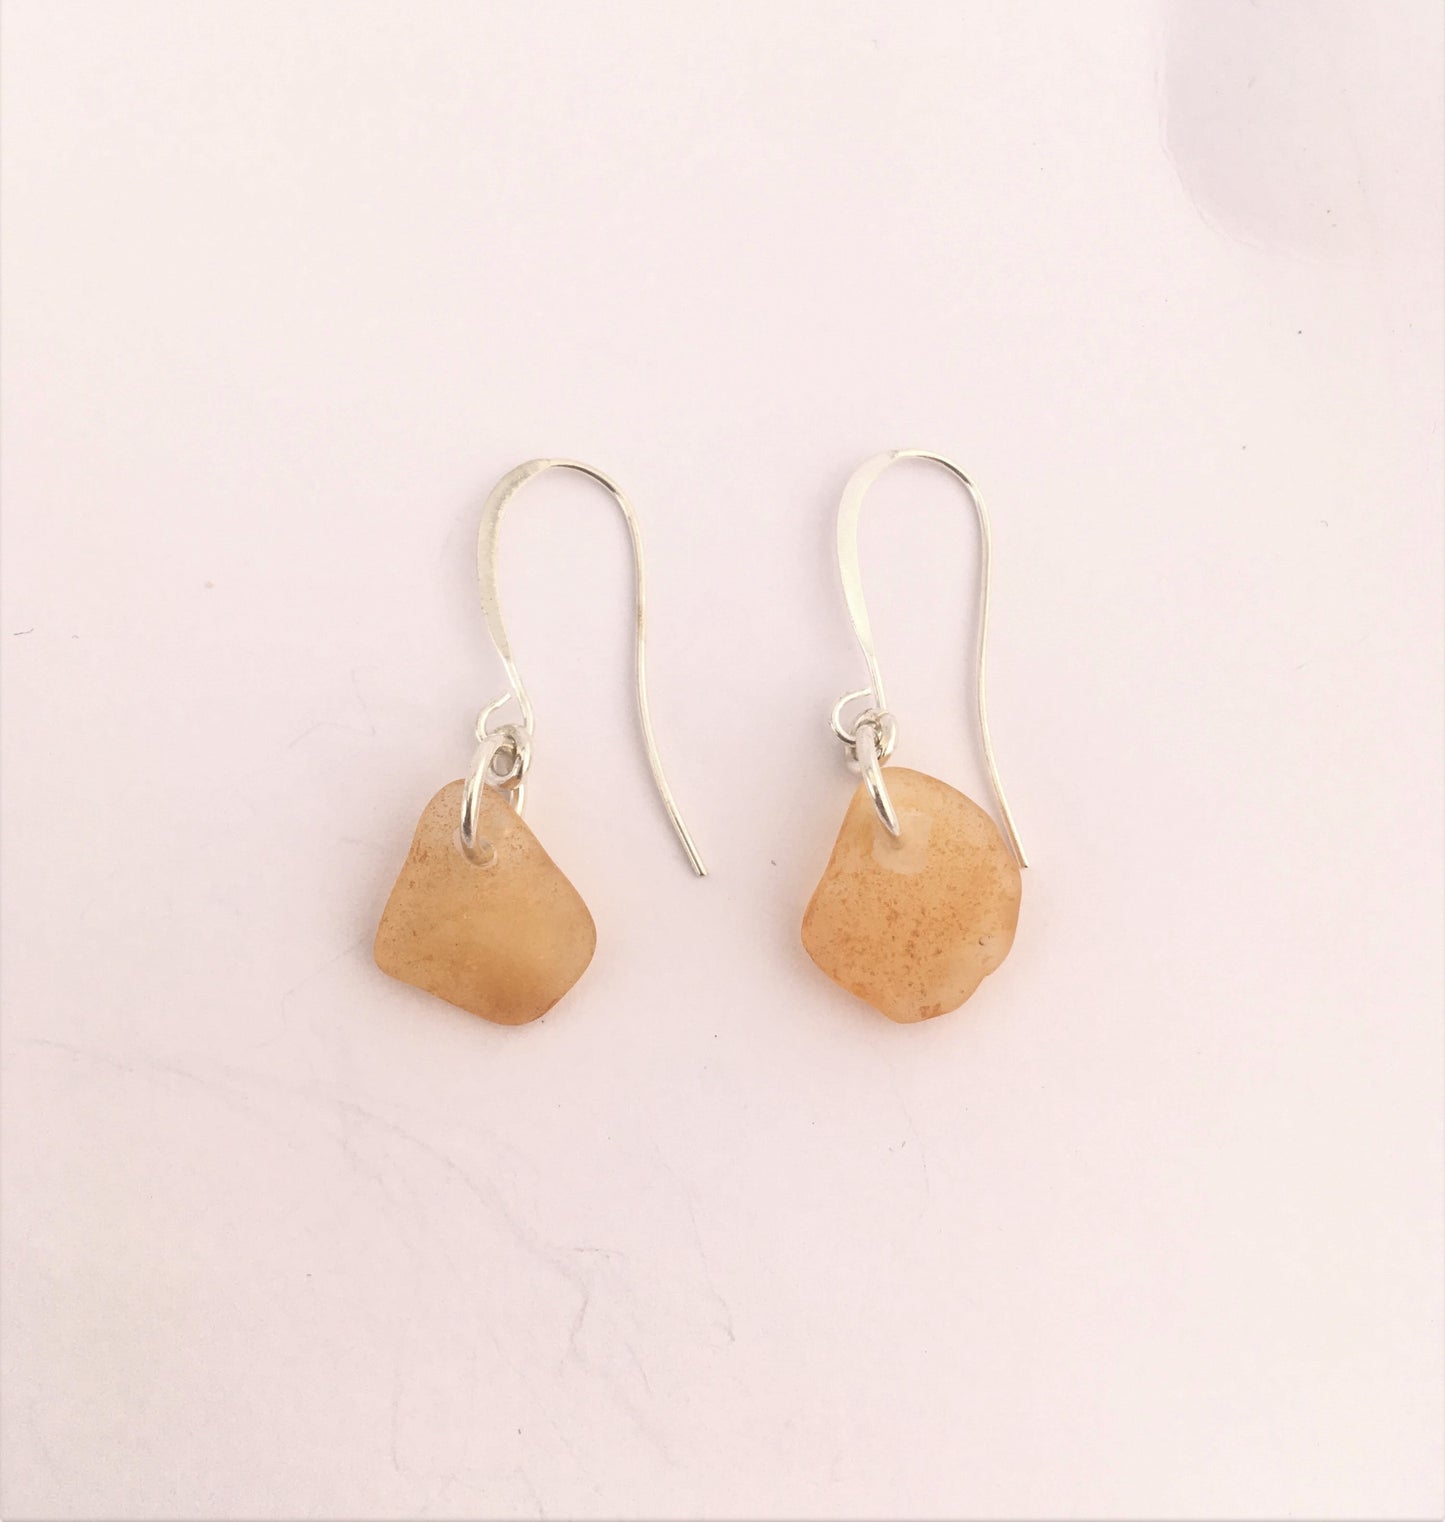 Shoreline Earrings: Rust colored sea glass from Northern California on a hypoallergenic nickle-free hook